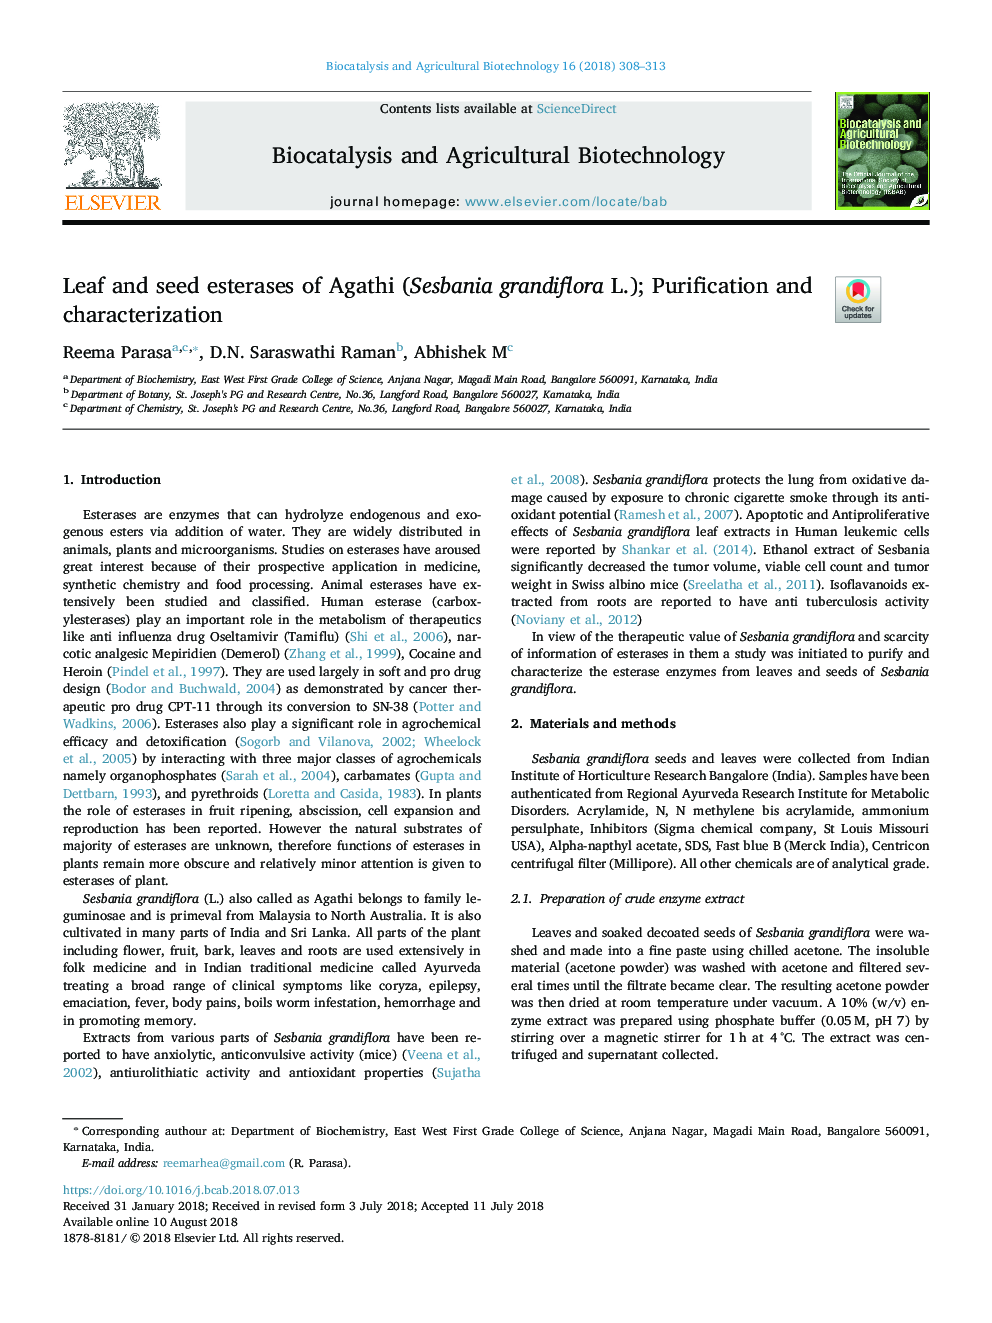 Leaf and seed esterases of Agathi (Sesbania grandiflora L.); Purification and characterization